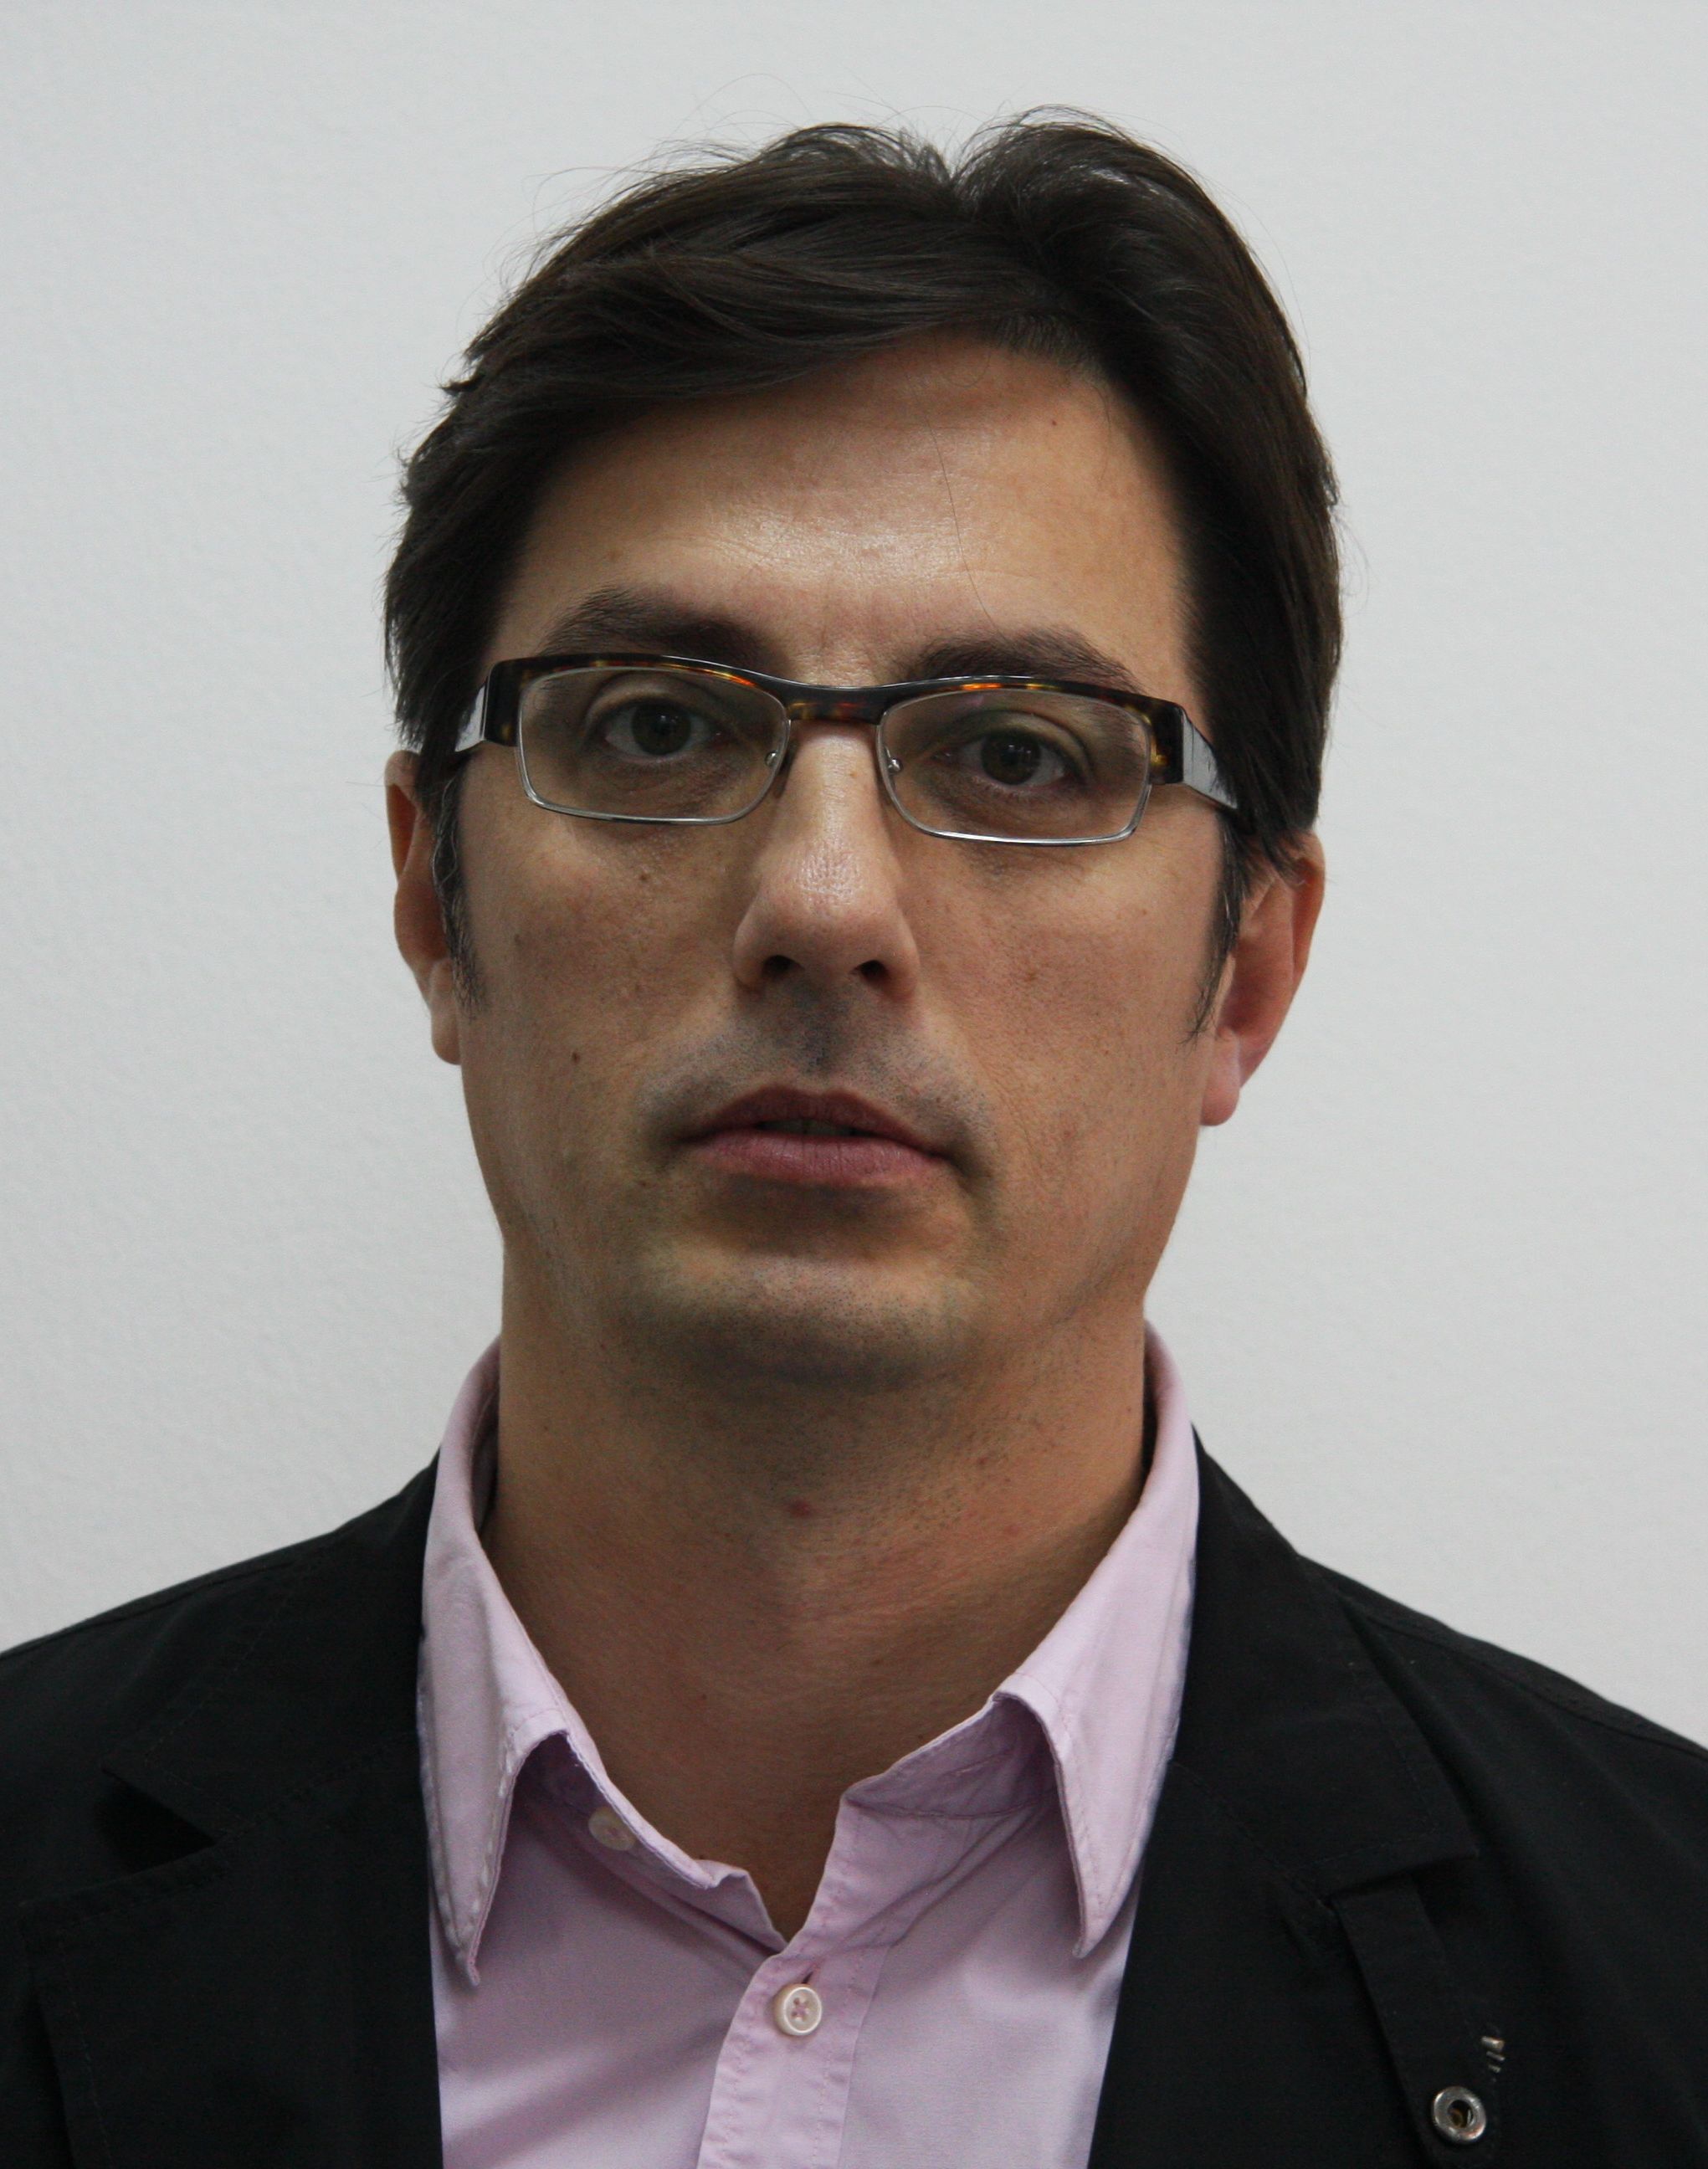 UACS Professor of Political Science, Stevo Pendarovski, PhD has been elected as President of the Republic of North Macedonia